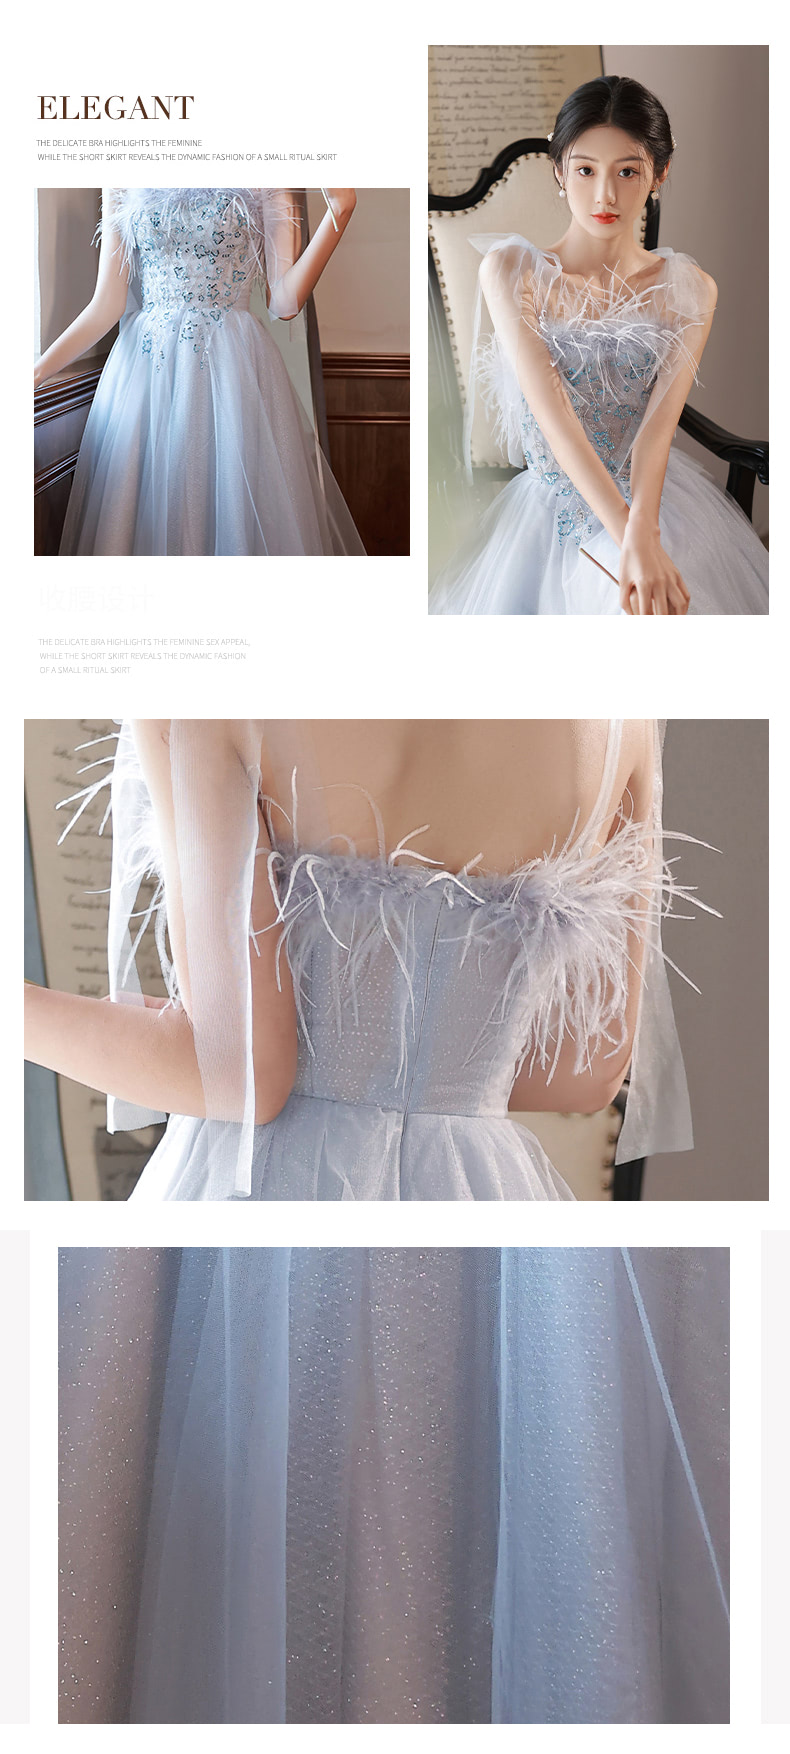 Feather-Cocktail-Party-Evening-Dress-Blue-Formal-Ball-Gown12.jpg